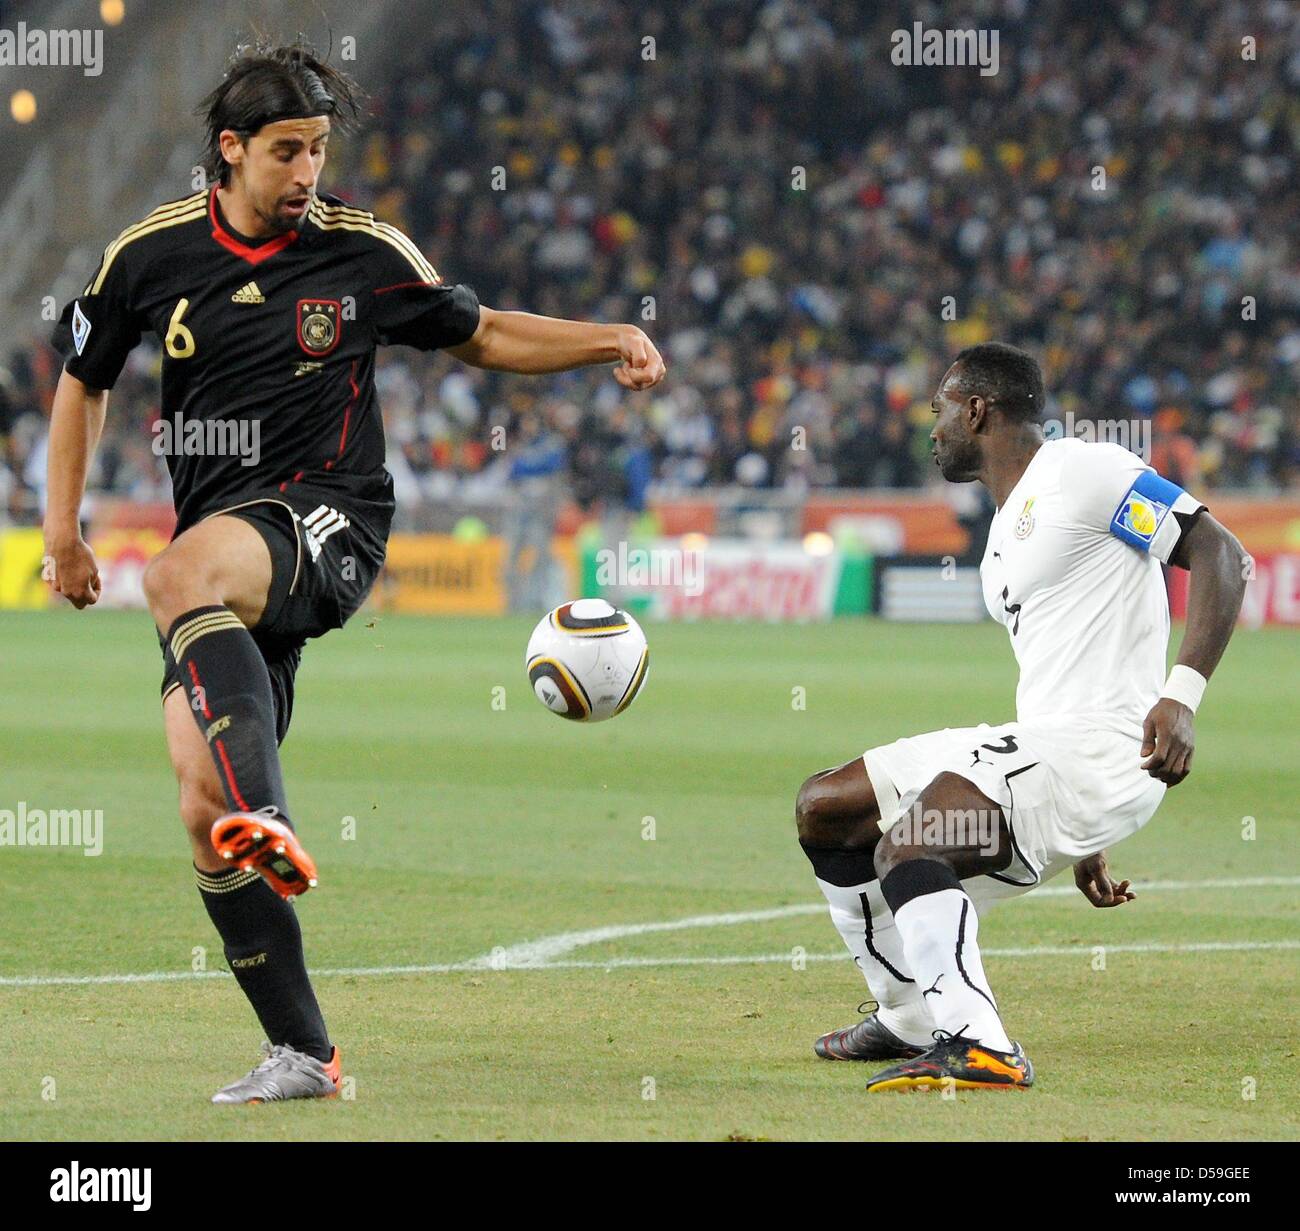 Germany's Sami Khedira (L) vies with Ghana's John Mensah during the 2010 FIFA World Cup group D match between Ghana and Germany at Soccer City, Johannesburg, South Africa 23 June 2010. Photo: Marcus Brandt dpa - Please refer to http://dpaq.de/FIFA-WM2010-TC  +++(c) dpa - Bildfunk+++ Stock Photo